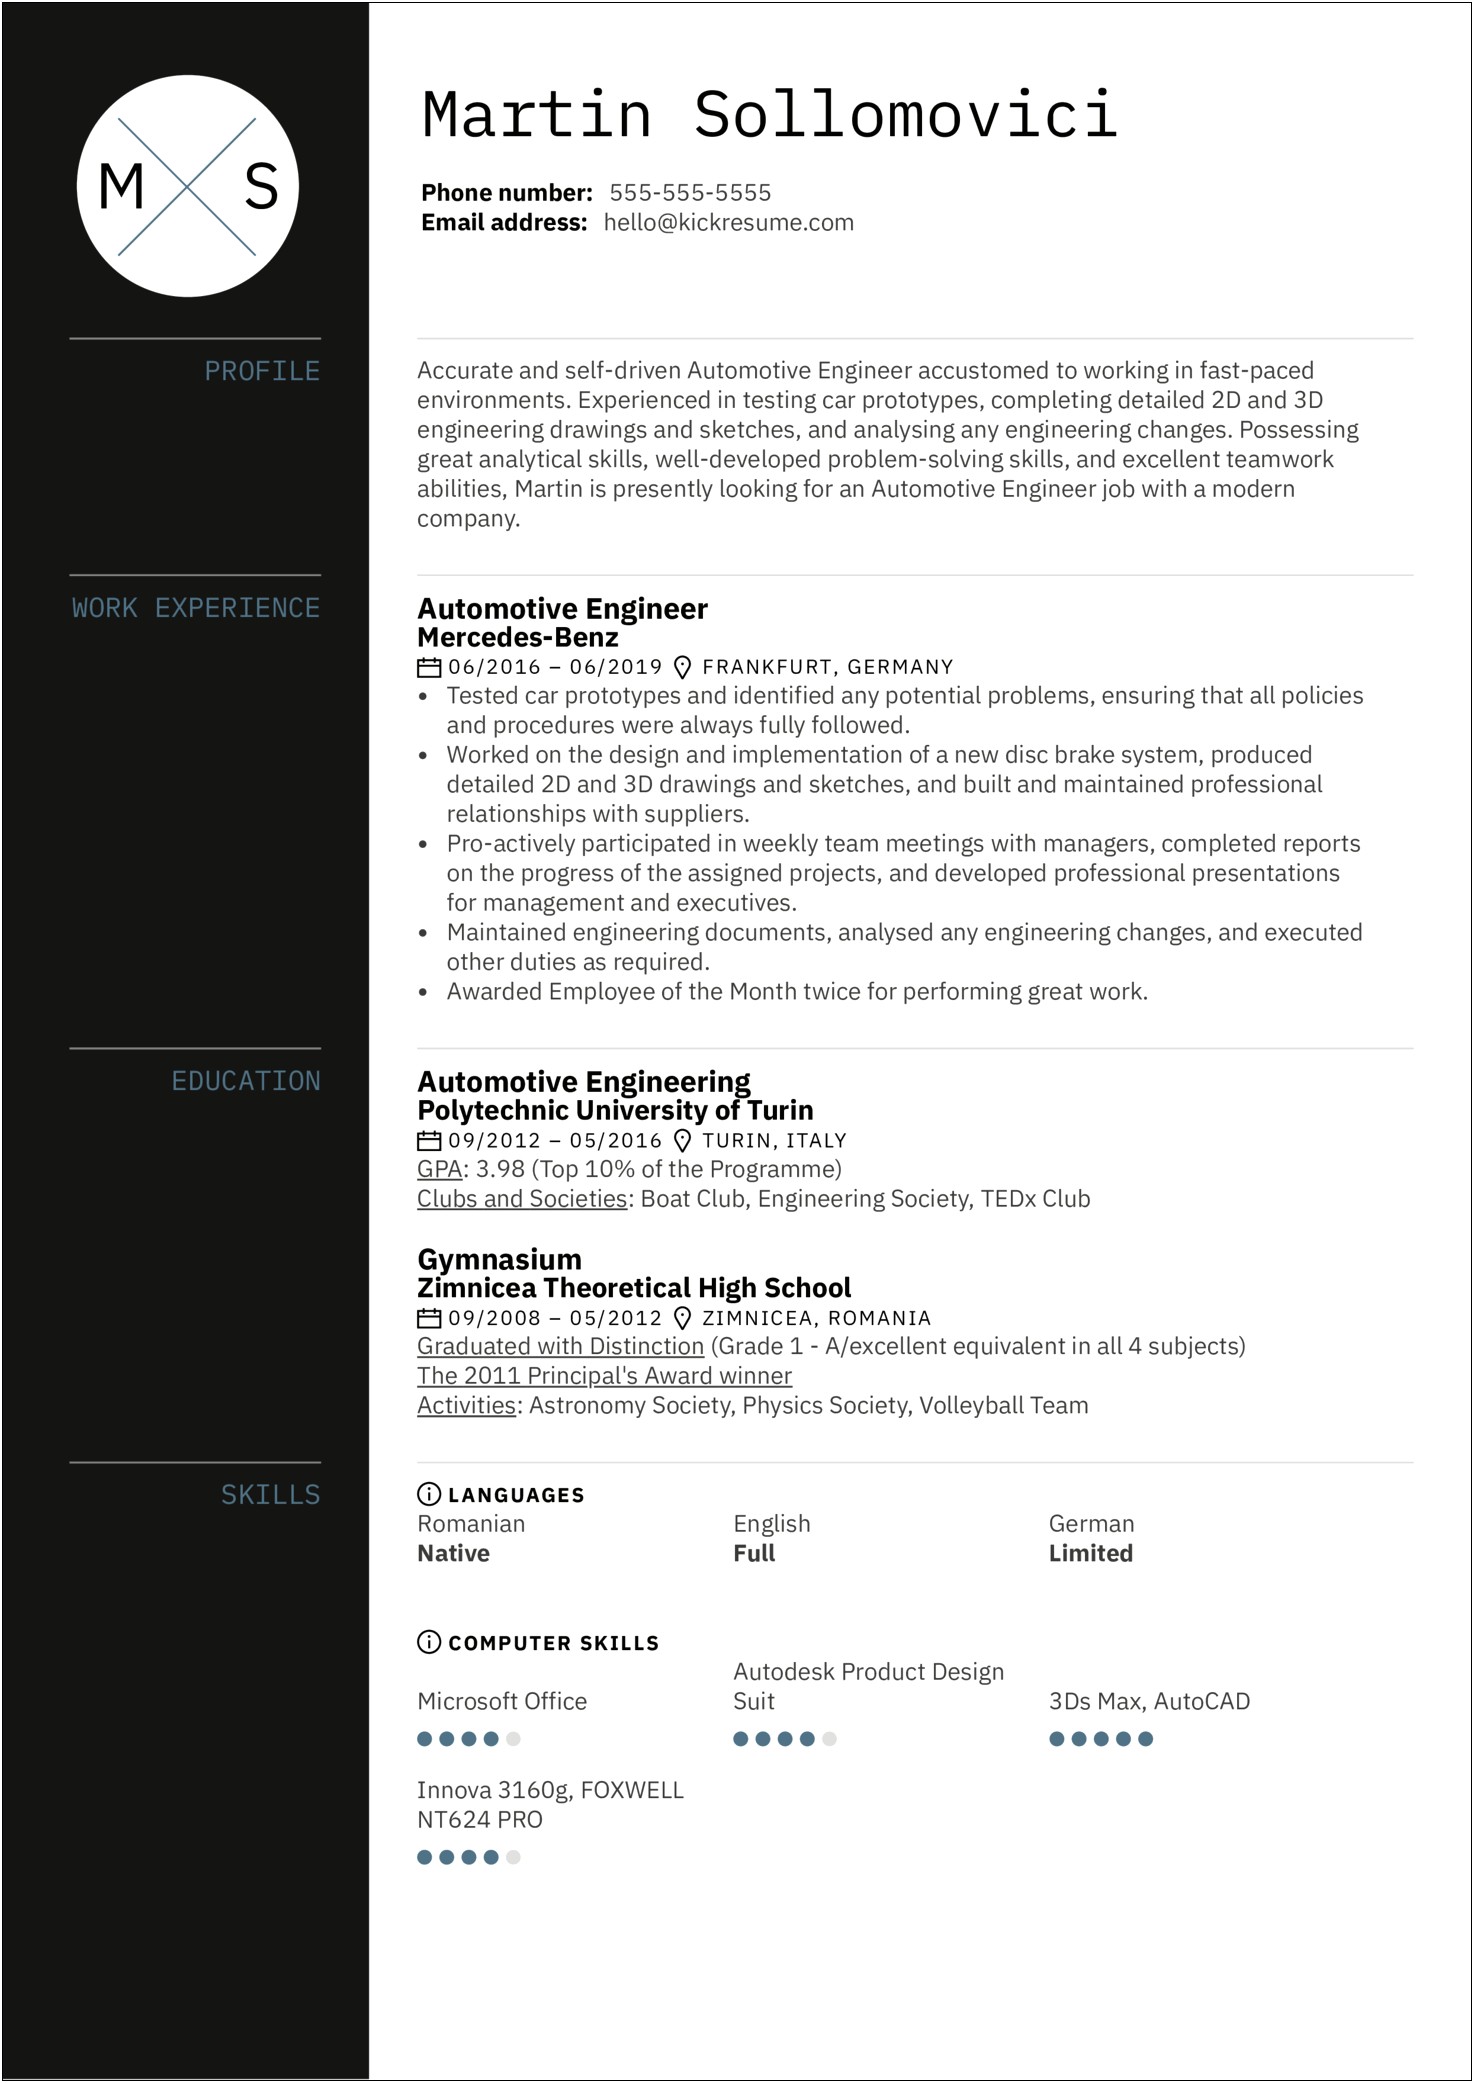 Autocad 2d Experience For Resume Sample